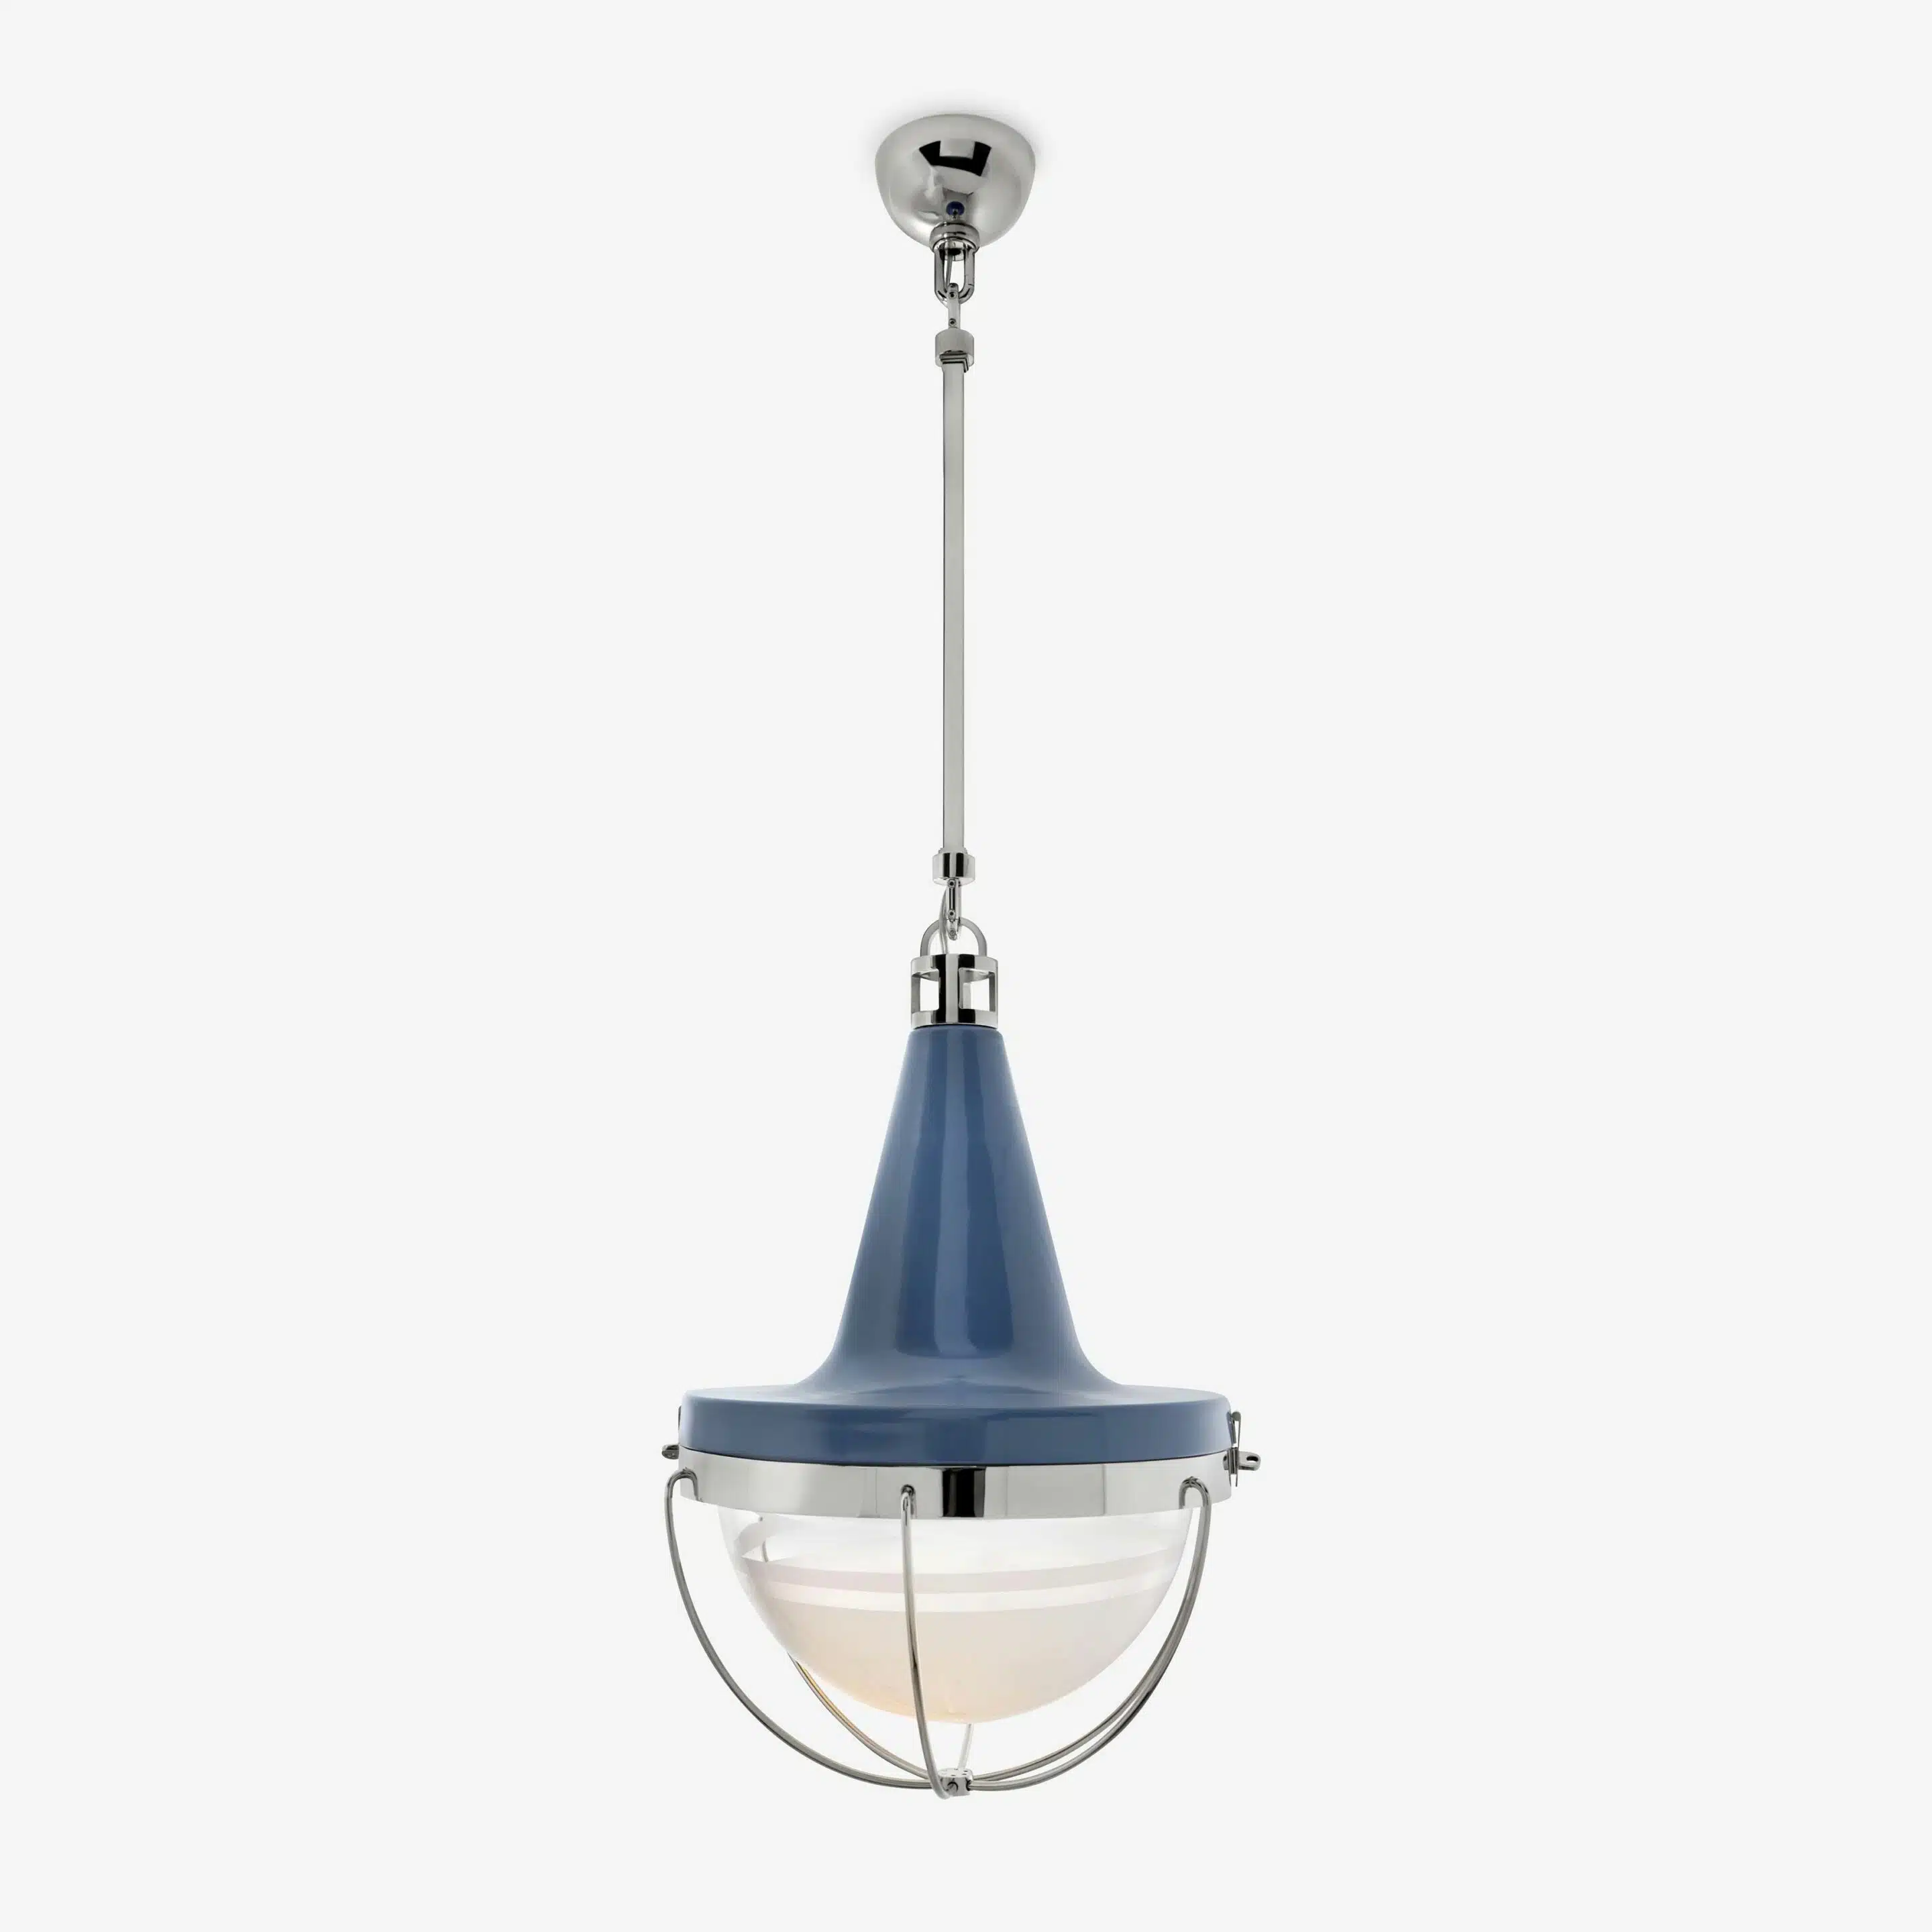 Blue pendant light fixture with frosted glass.